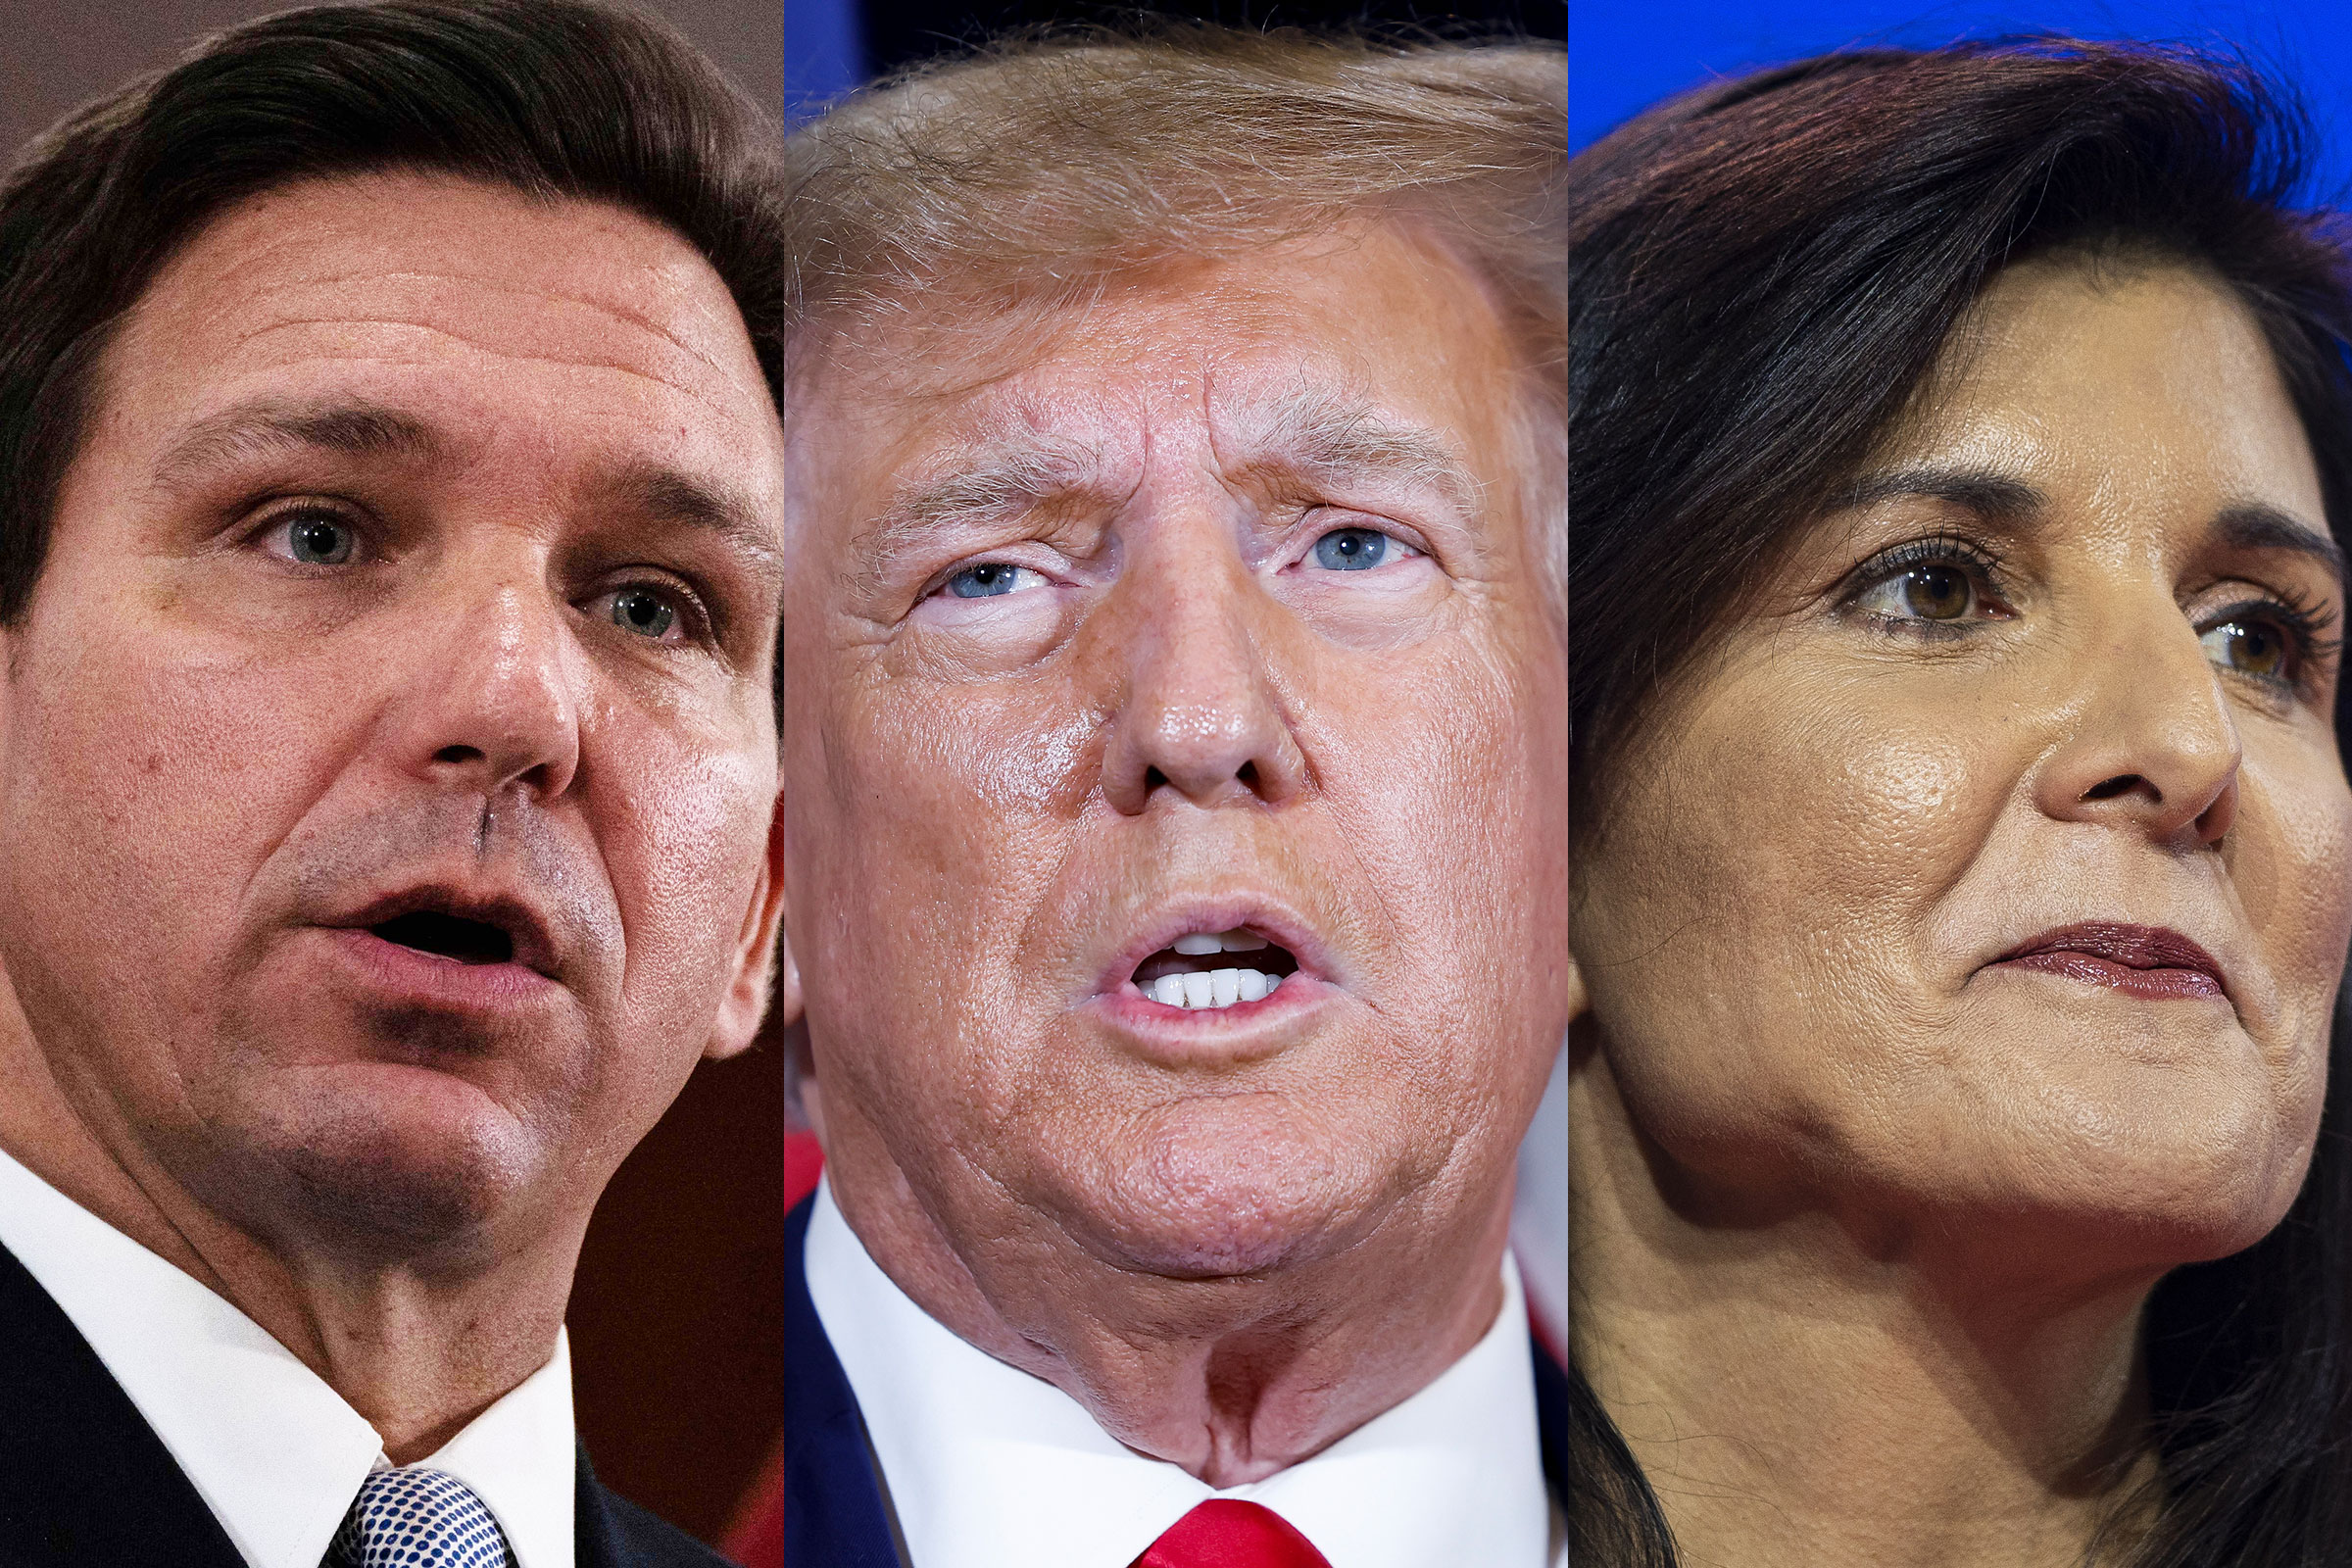 Florida Governor Ron DeSantis; Former President Donald Trump; Former ambassador to the United Nations Nikki Haley (Cheney Orr—AFP/Getty Images; Anna Moneymaker—Getty Images; Al Drago—Bloomberg/Getty Images)